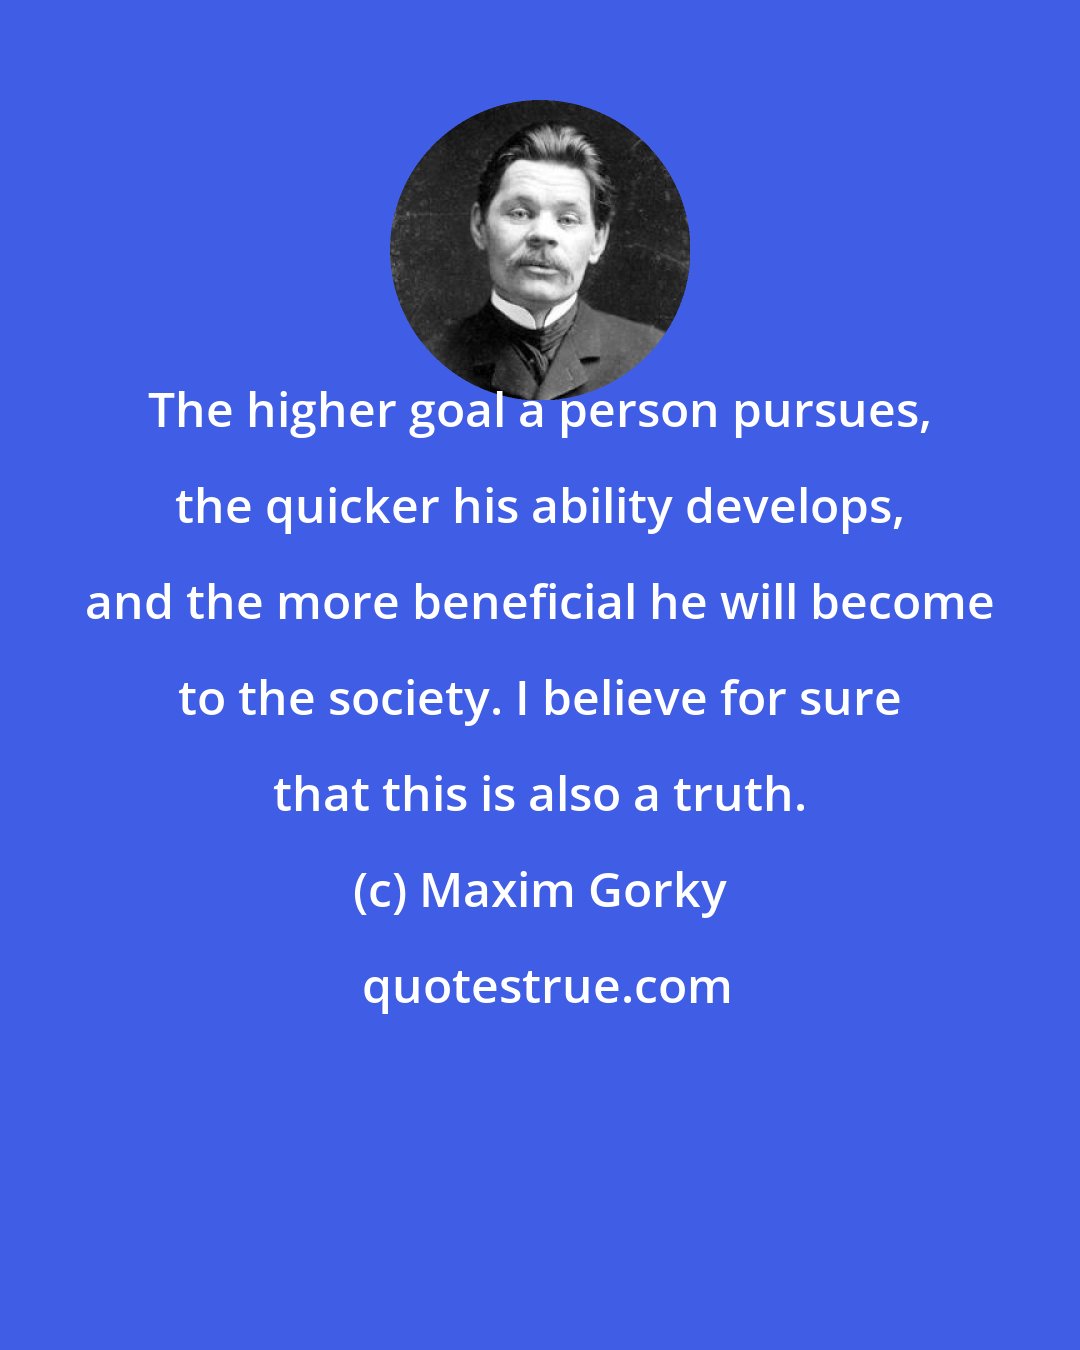 Maxim Gorky: The higher goal a person pursues, the quicker his ability develops, and the more beneficial he will become to the society. I believe for sure that this is also a truth.